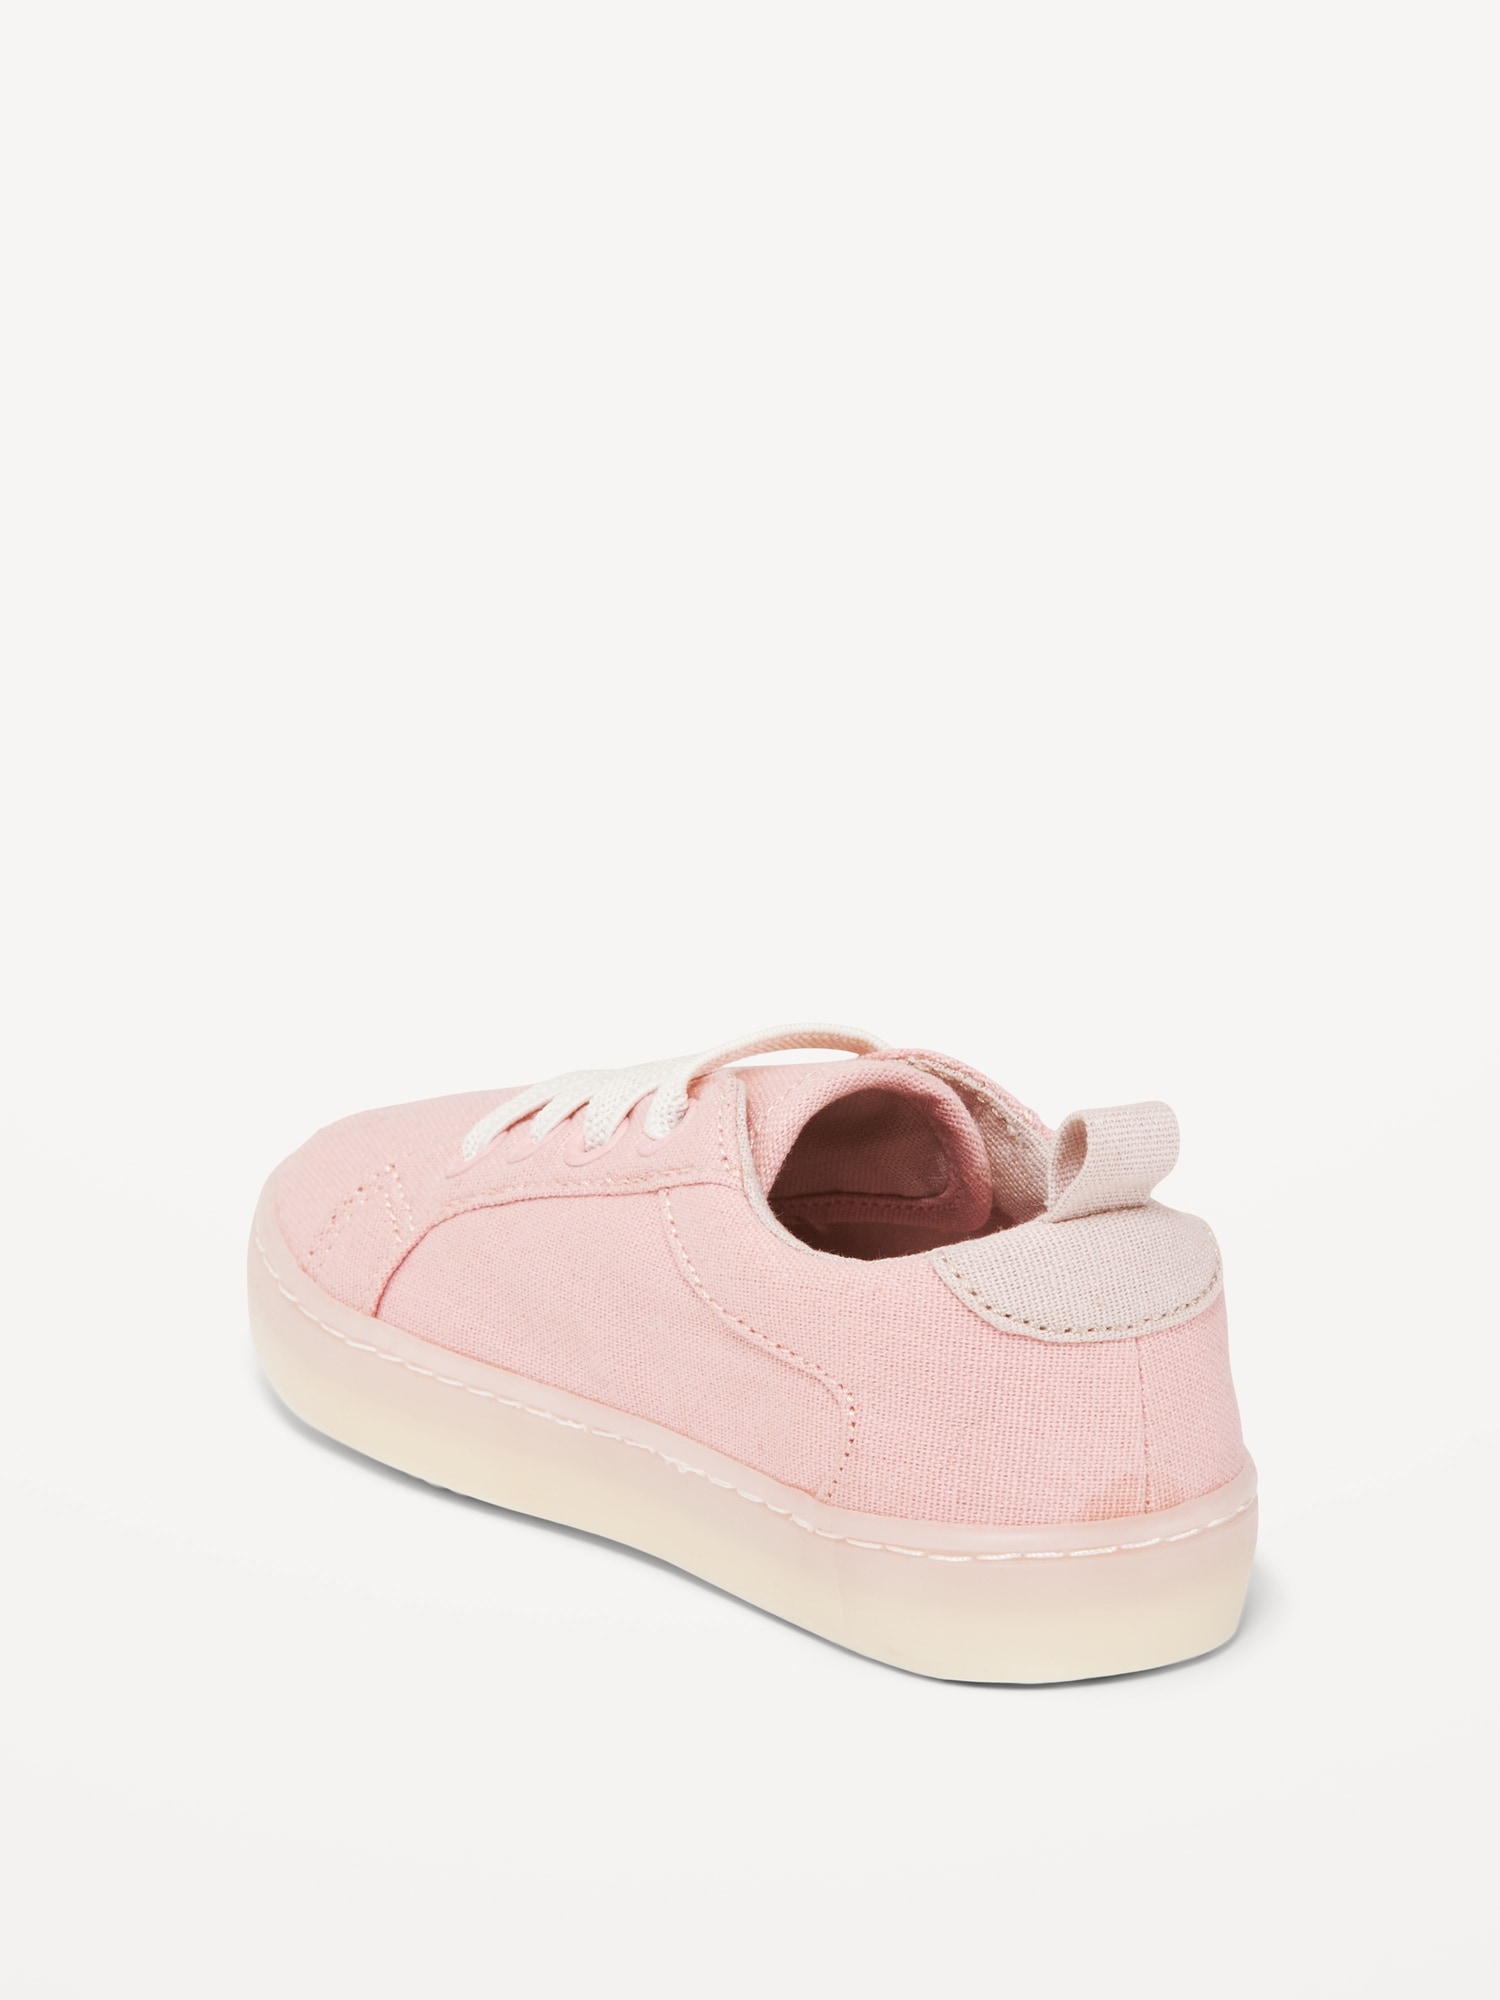 Elastic-Lace Canvas Sneakers for Toddler Girls | Old Navy